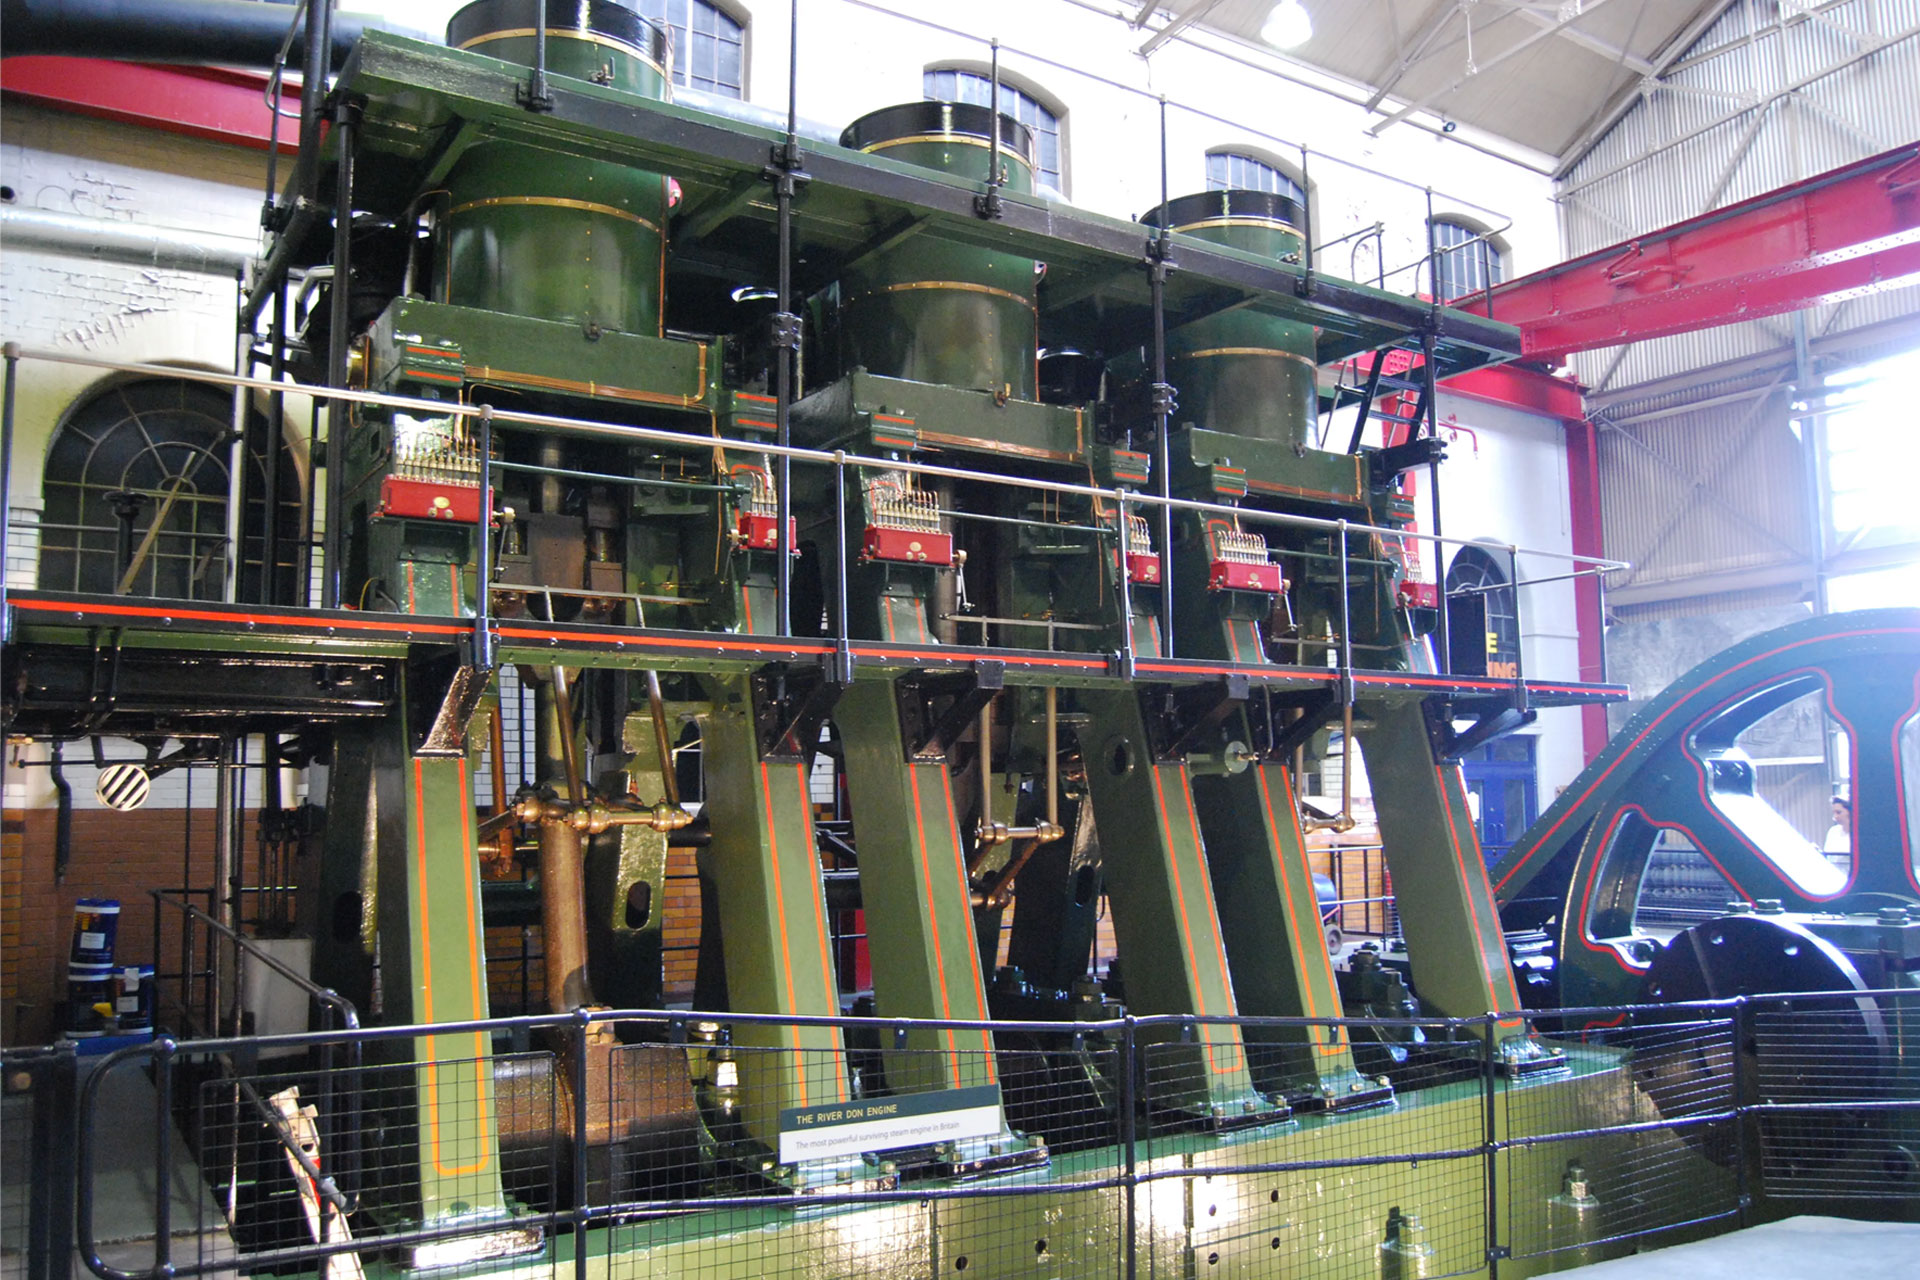 The River Don Engine